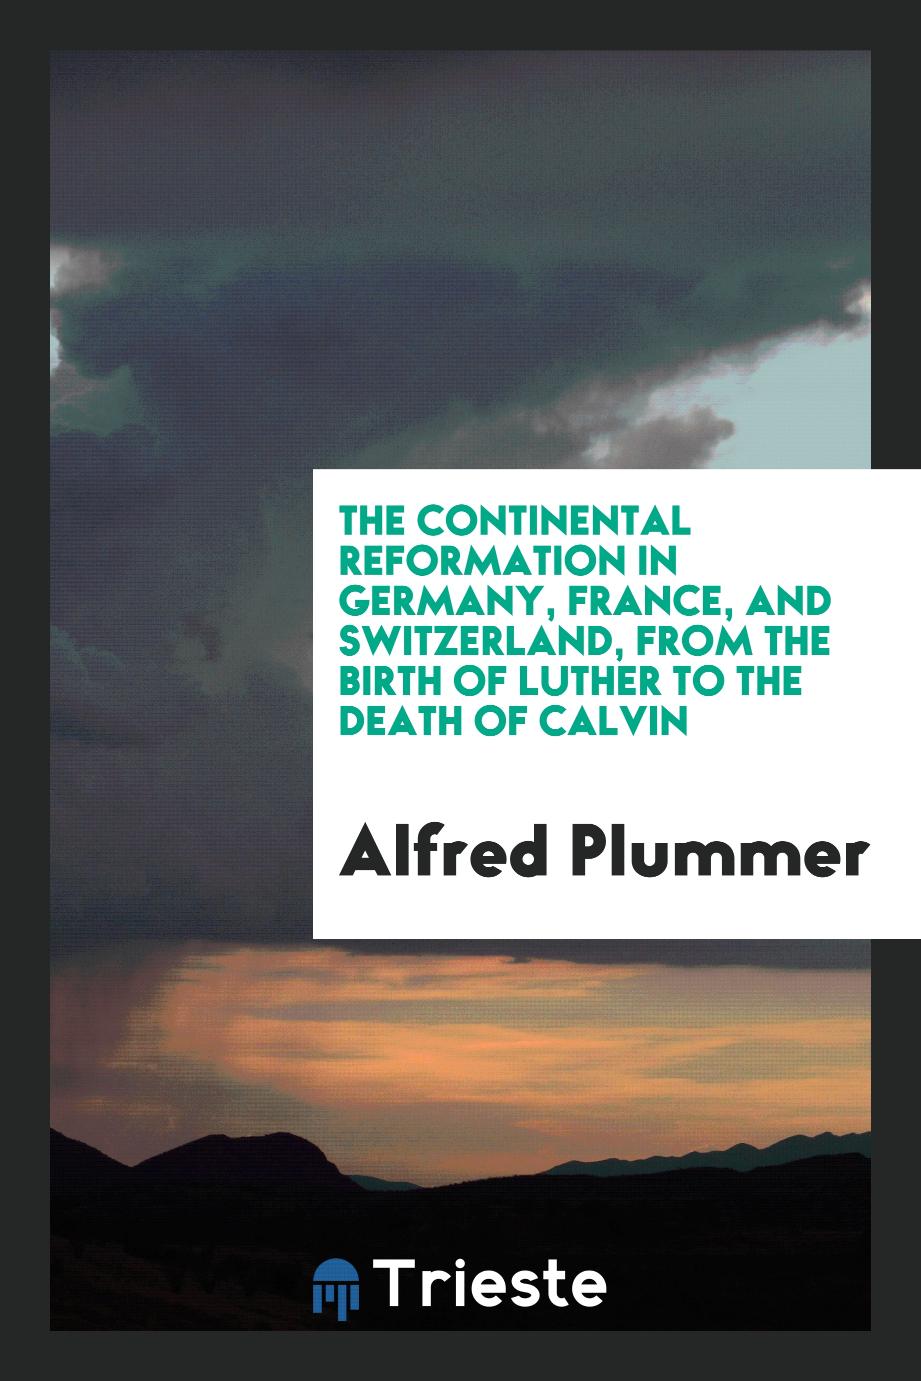 The continental reformation in Germany, France, and Switzerland, from the birth of Luther to the death of Calvin